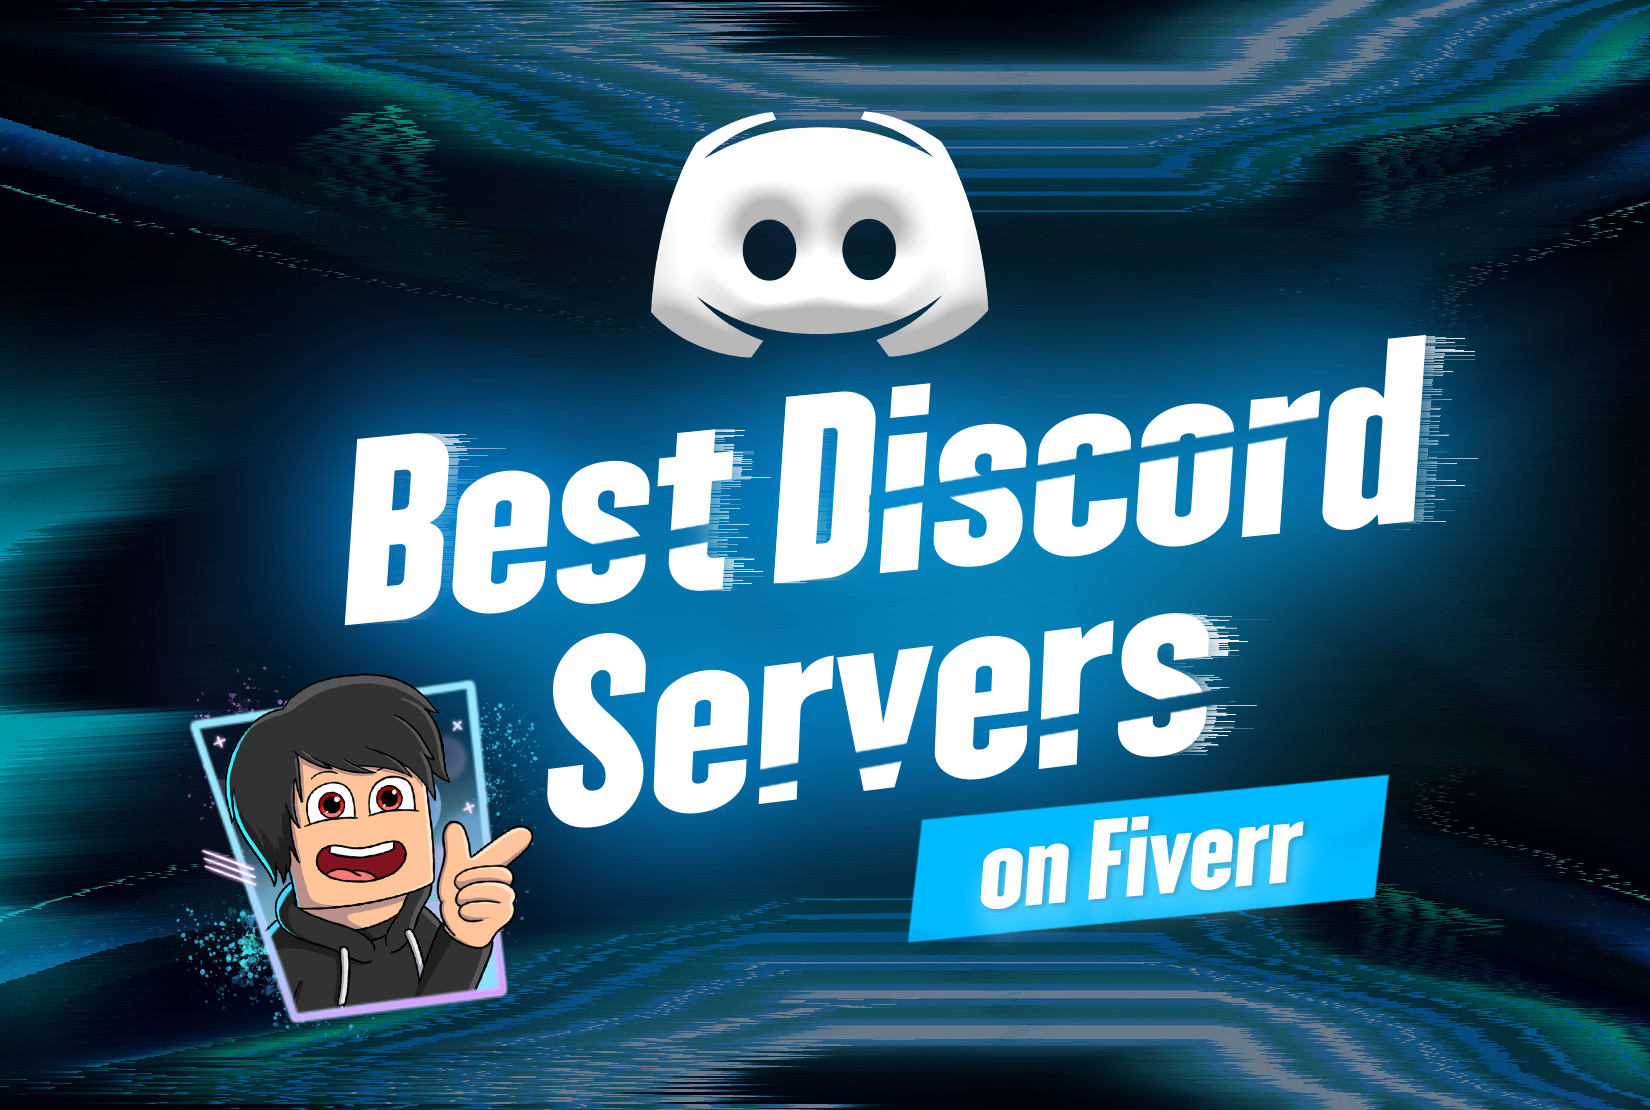 Make You The Best Discord Server By Codeplayz - discord server quick start guide community tutorials roblox